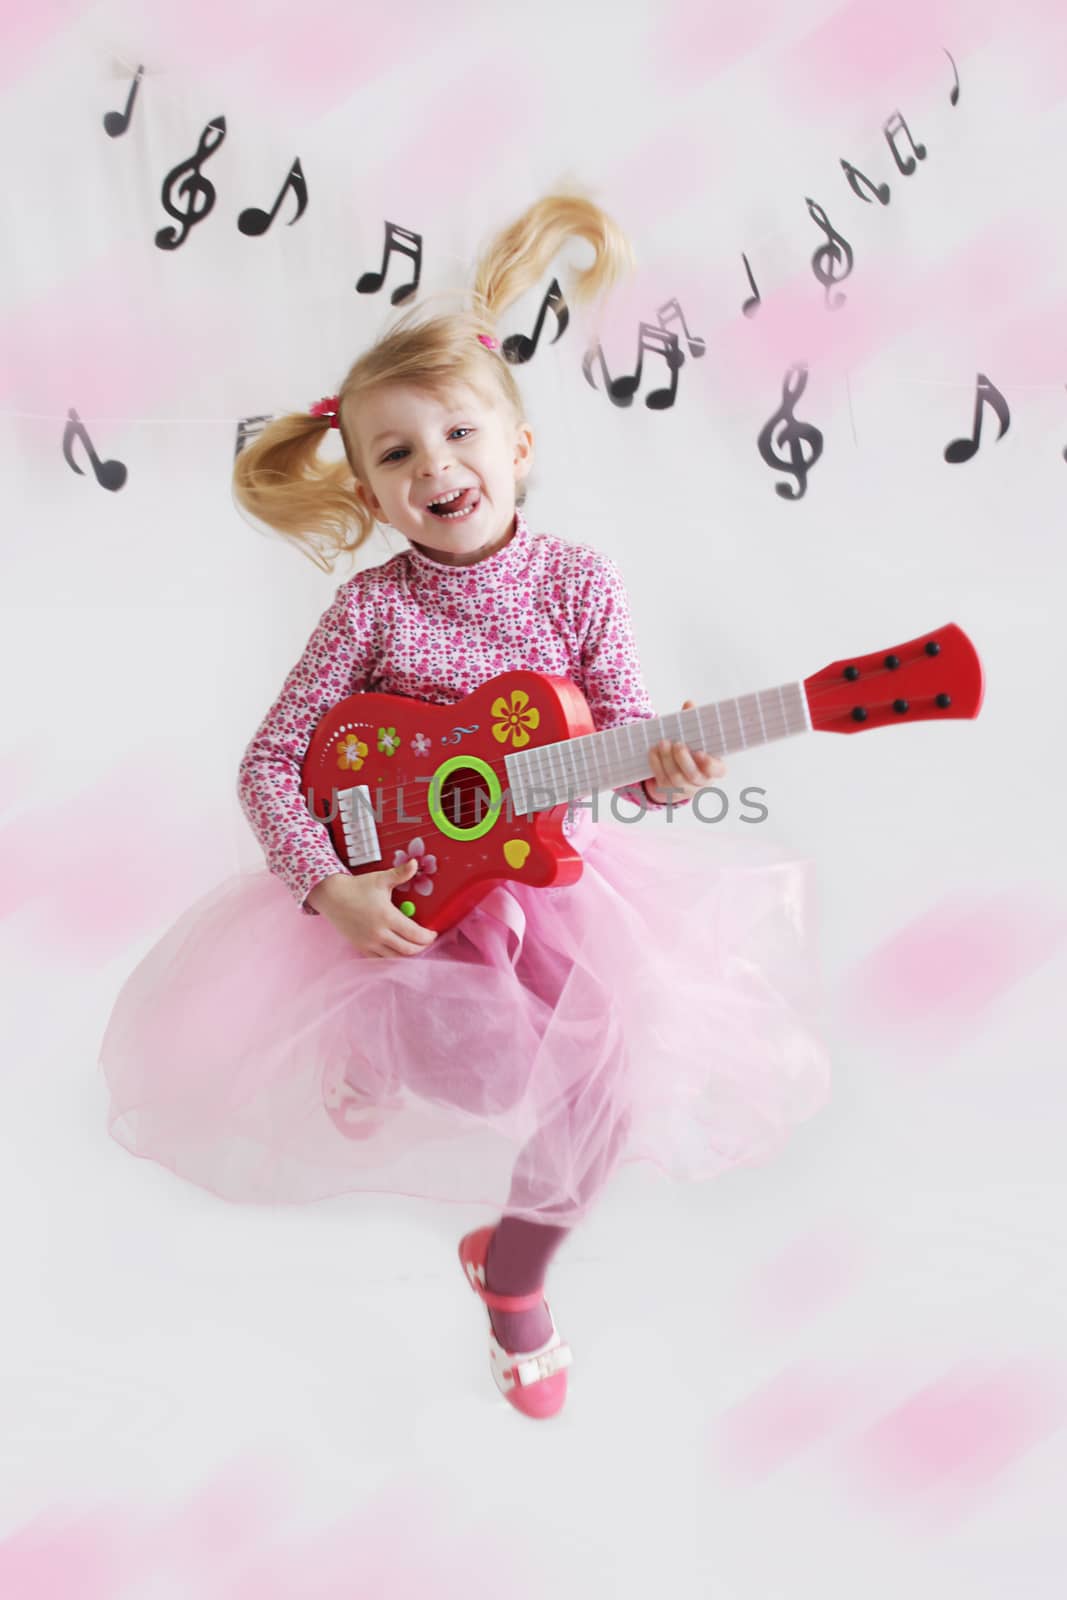 Joyful girl with guitar on music notes background